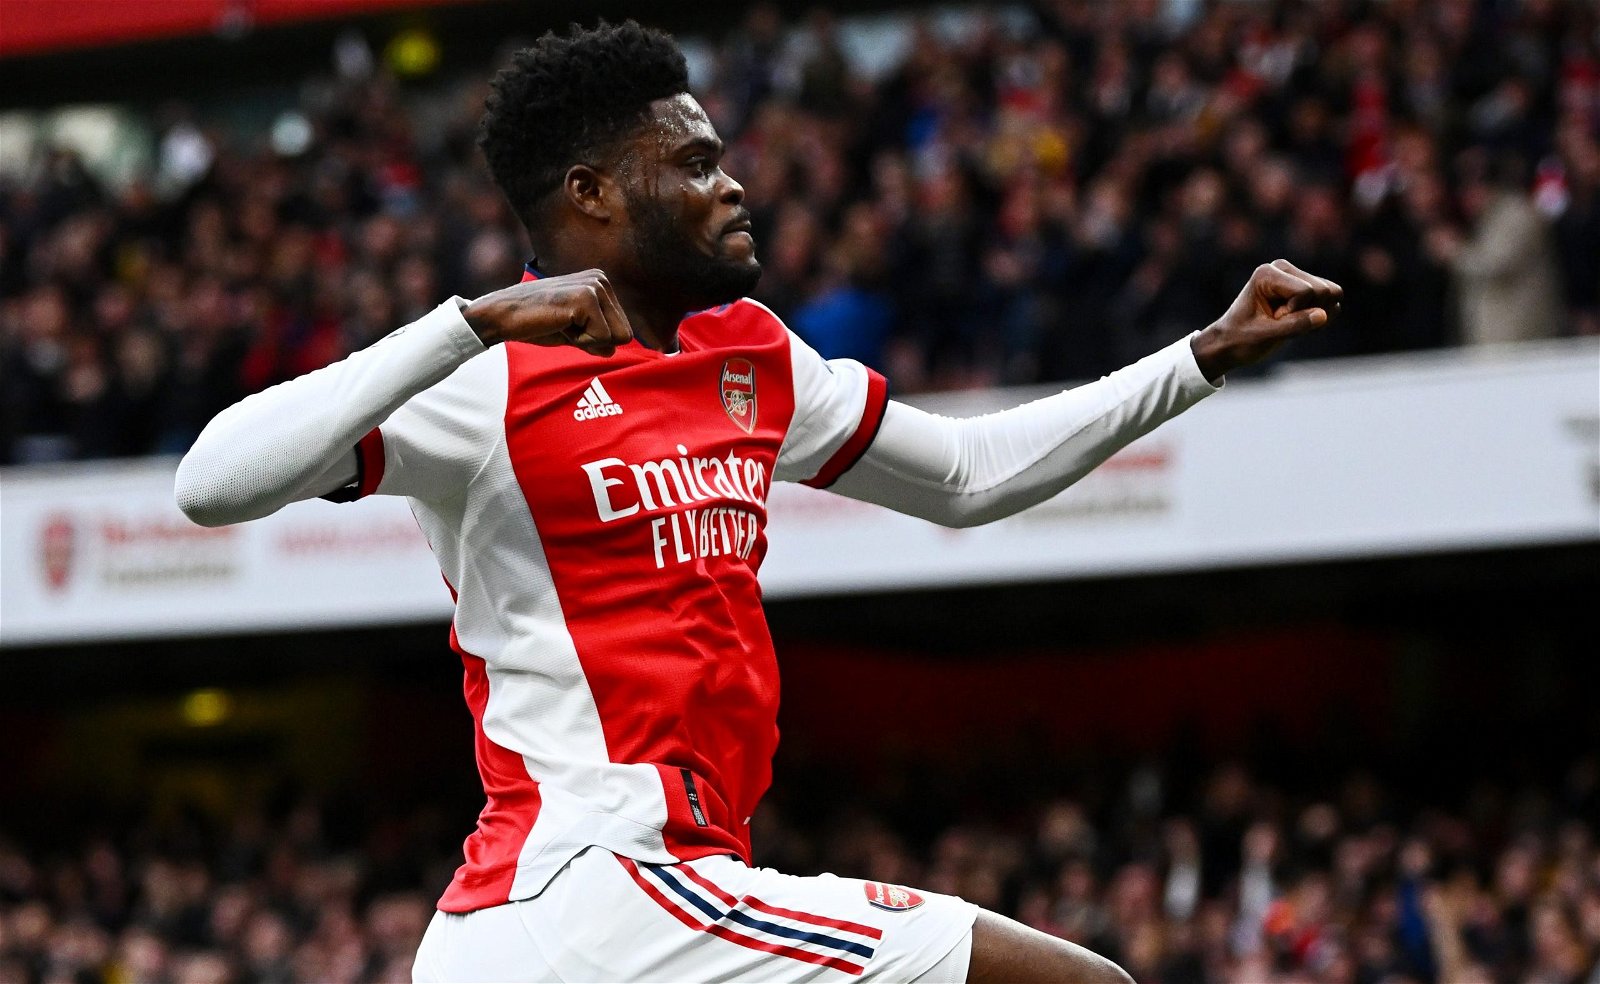 Arsenal star Thomas Partey may have suffered season-ending “stress” problem